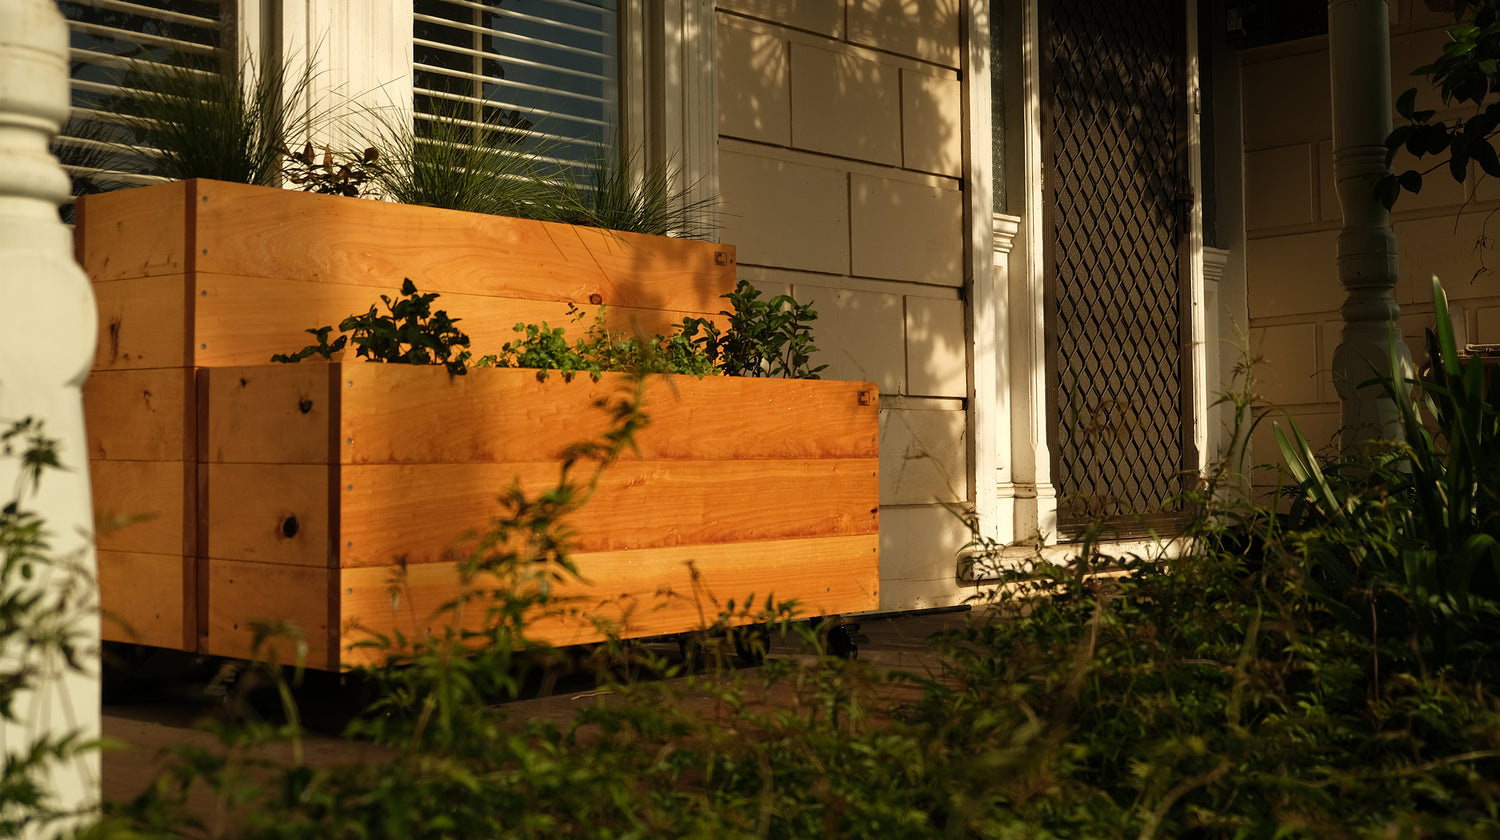 Herb Junior and Herb Senior timber planter box getting morning sun on front balcony of residential house. Planted with variety of fresh herbs ready for eating. Lined with a drainage lining ready to plant. 